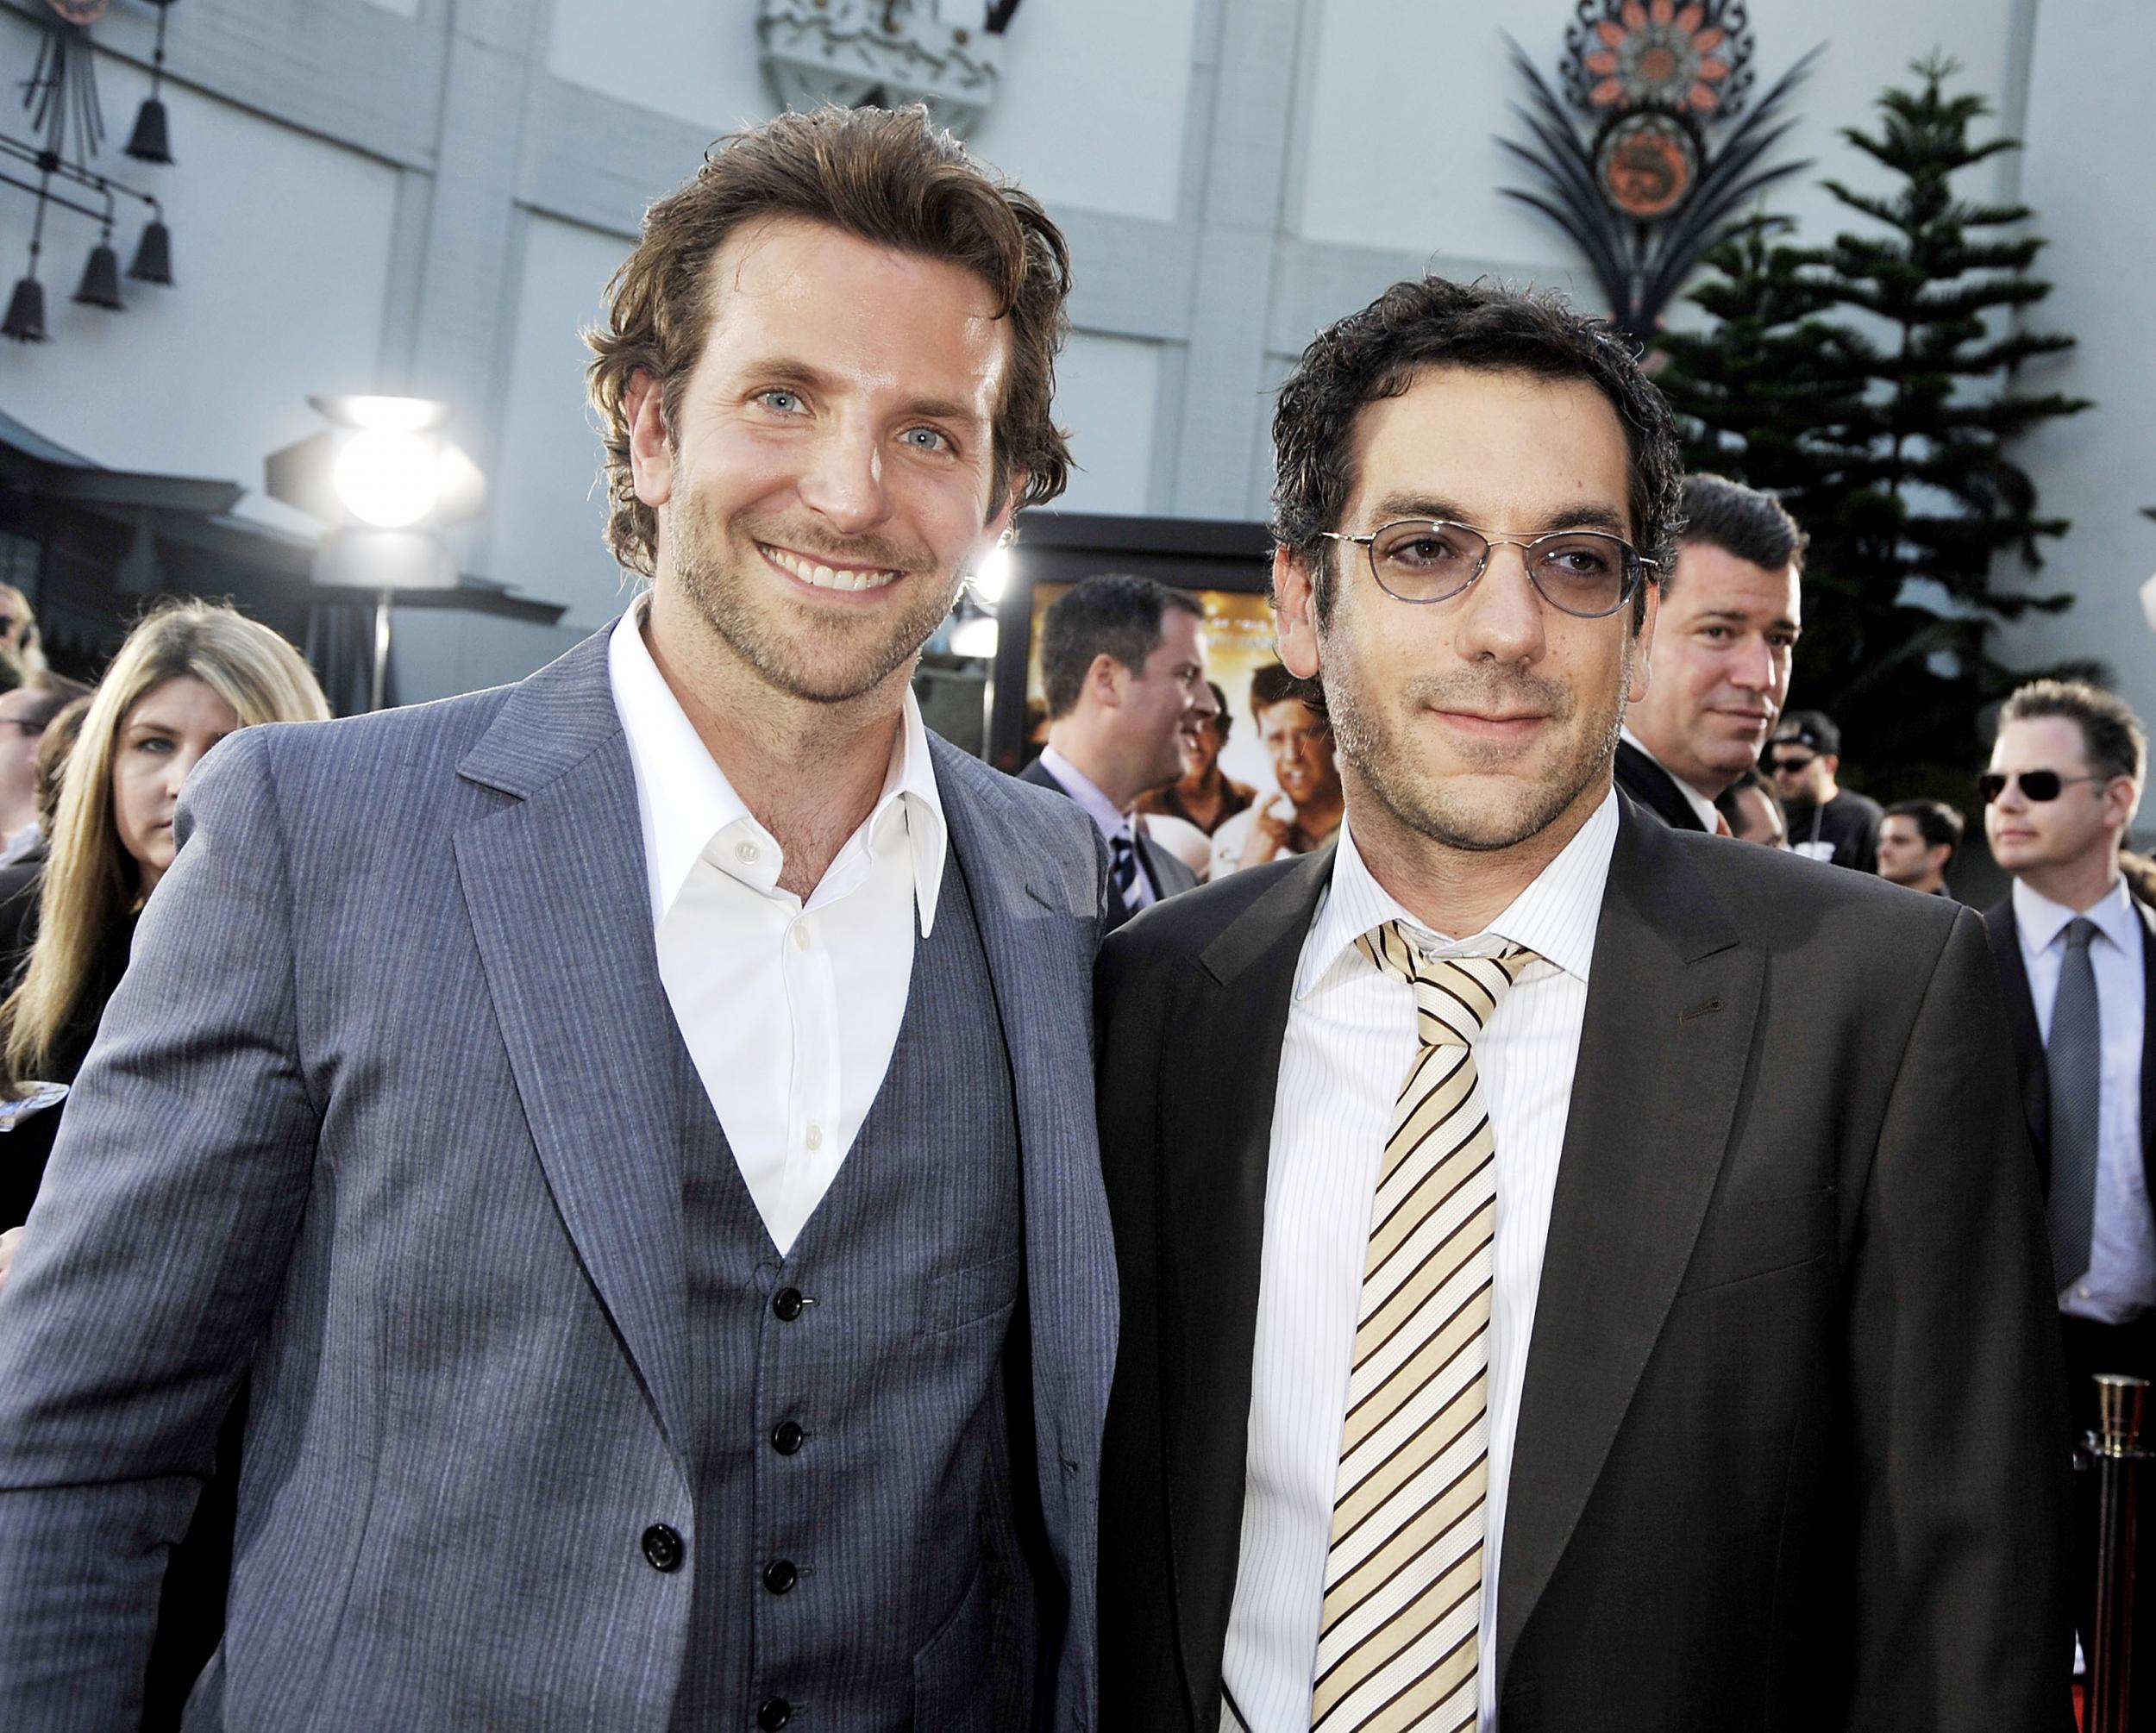 Bradley Cooper reuniting with The Hangover director for ISIS